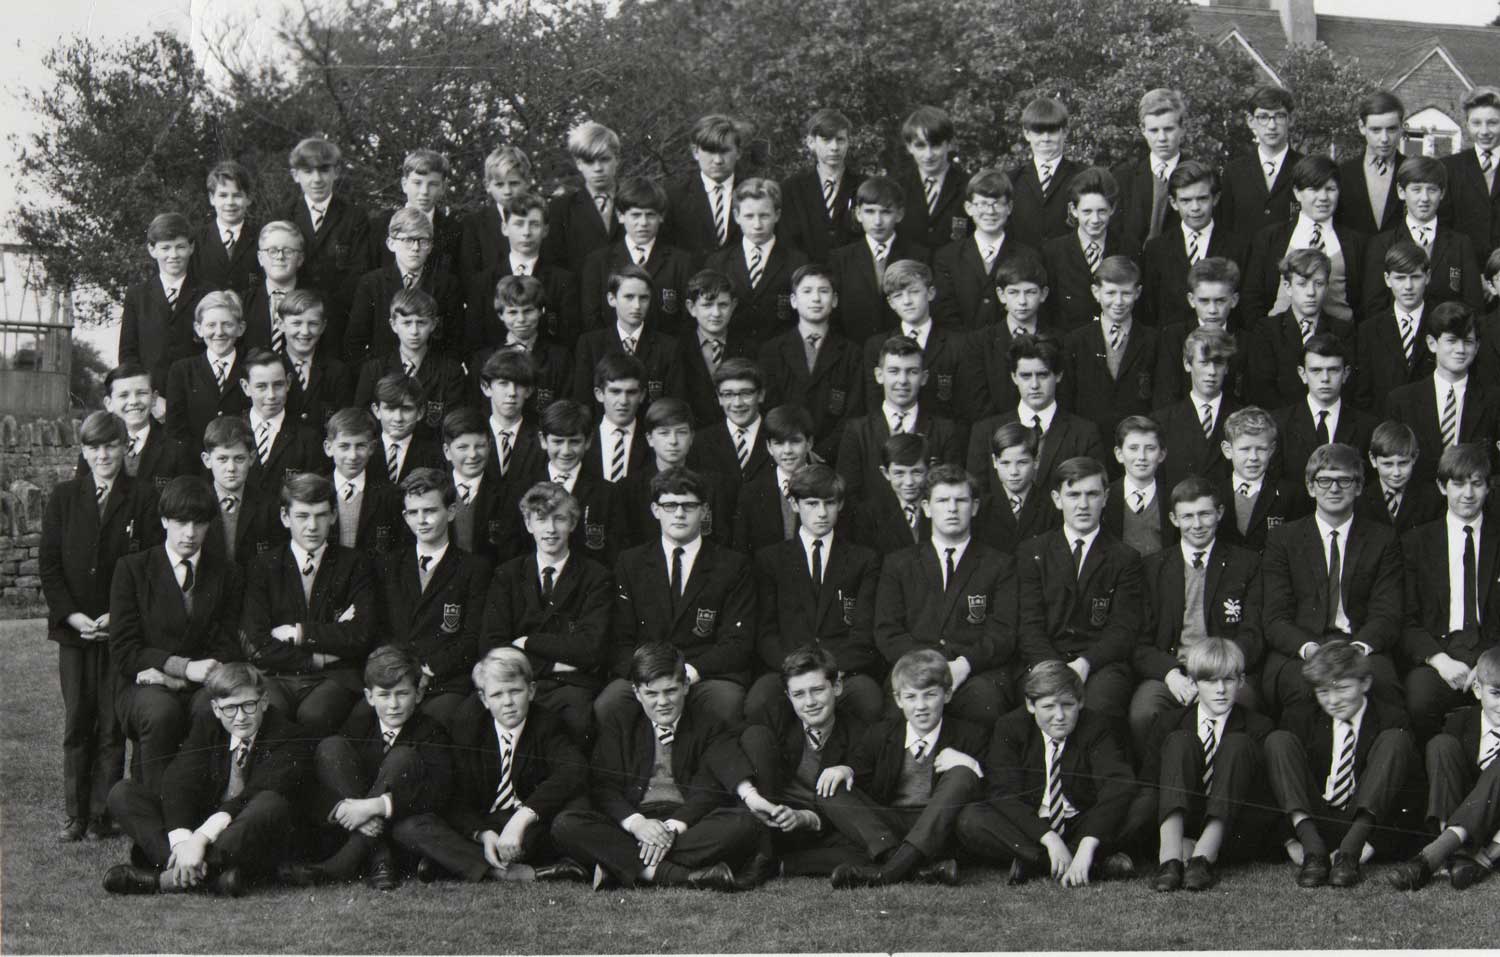 A photo of section1 of the Bells Grammar School photo from 1964 - section 1